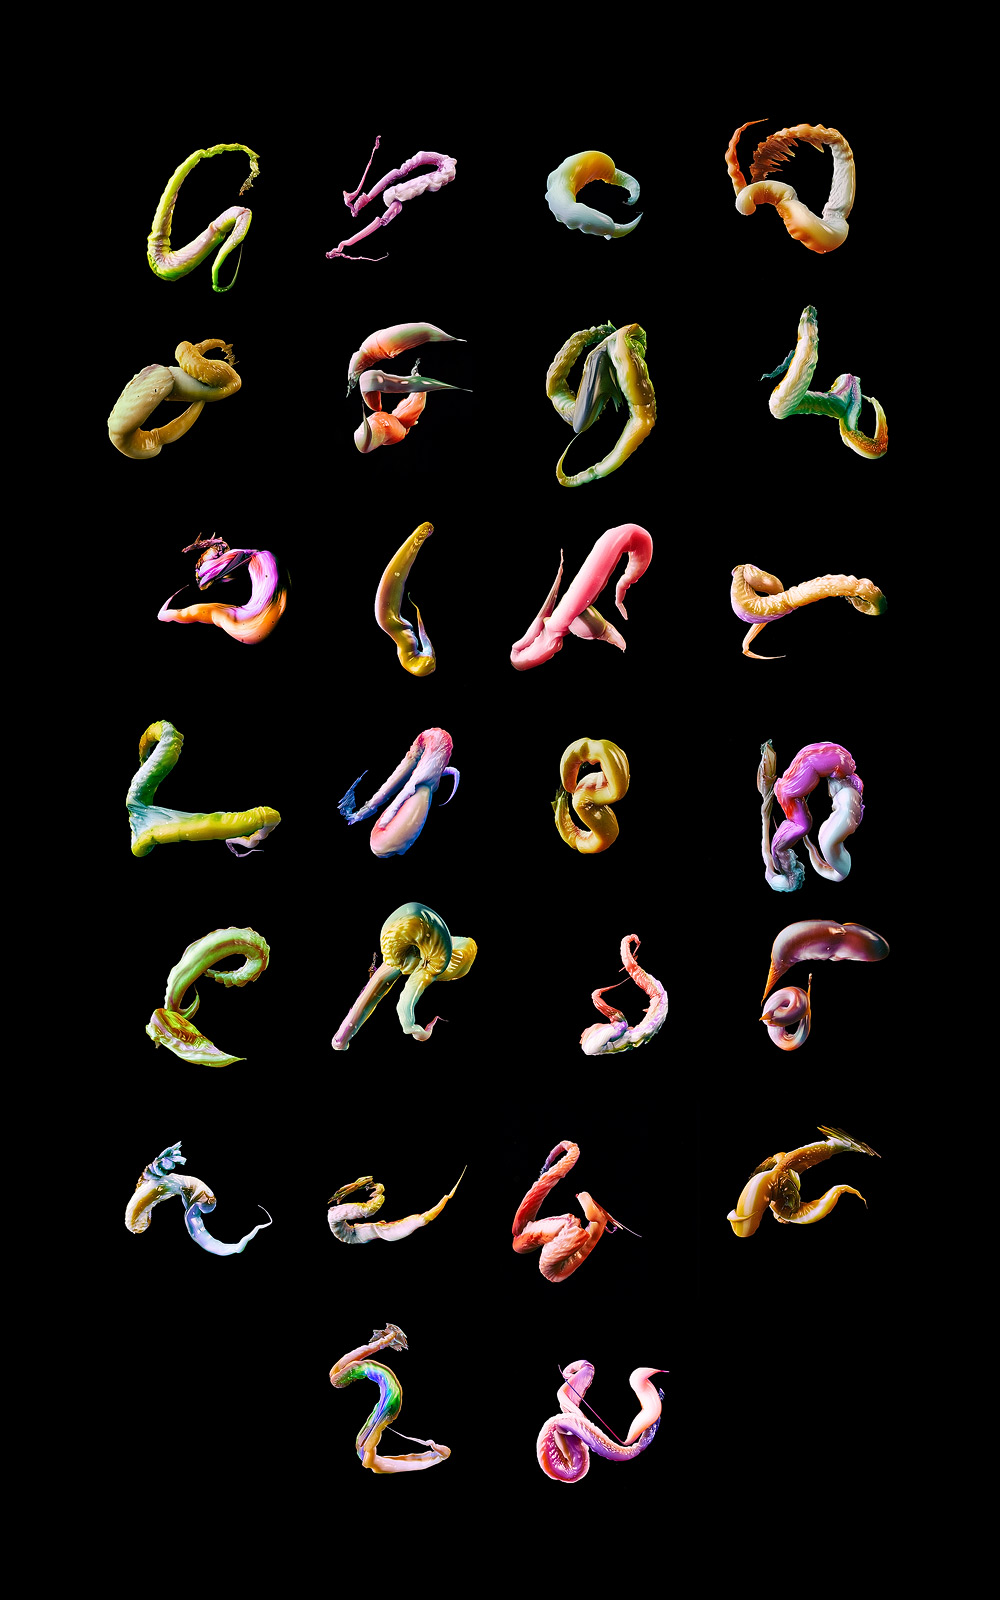 Each Letter Of This Alphabet Moves Like An Appendage Of An Animal